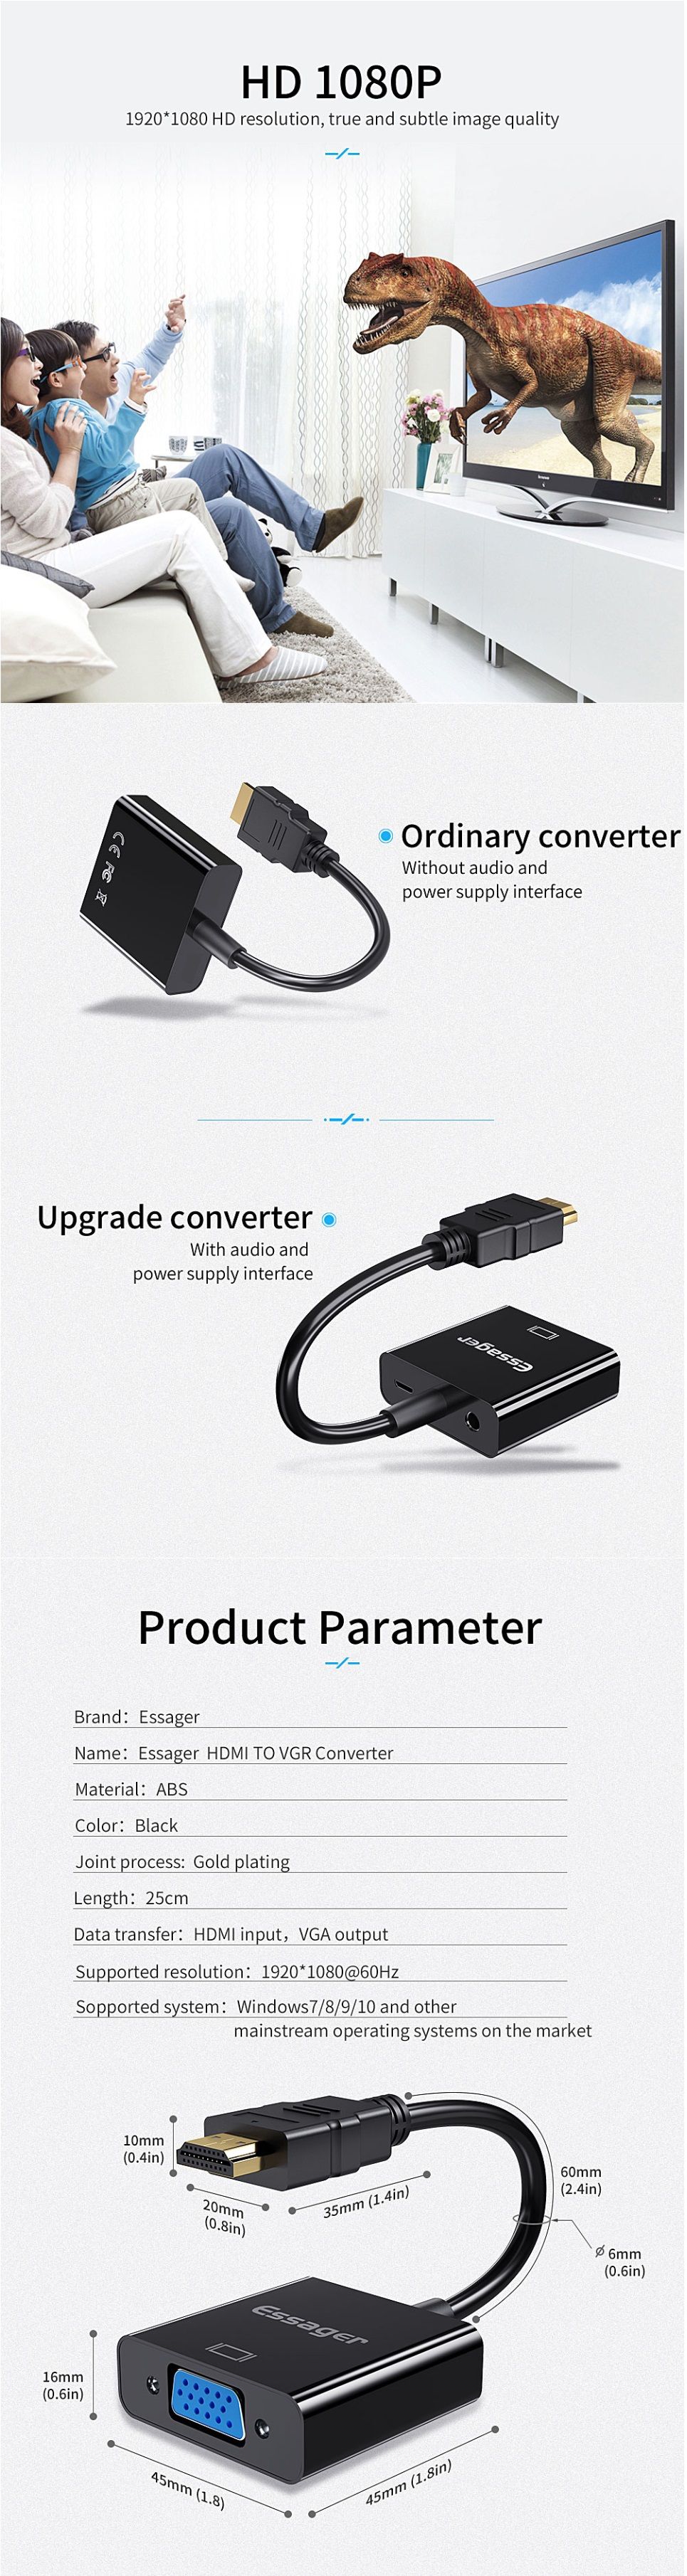 ESSAGER-HDMI-to-VGA-Micro-Power-Supply-35mm-Audio-Adapter-Converter-For-Laptop-PC-Notebook-Projector-1630788